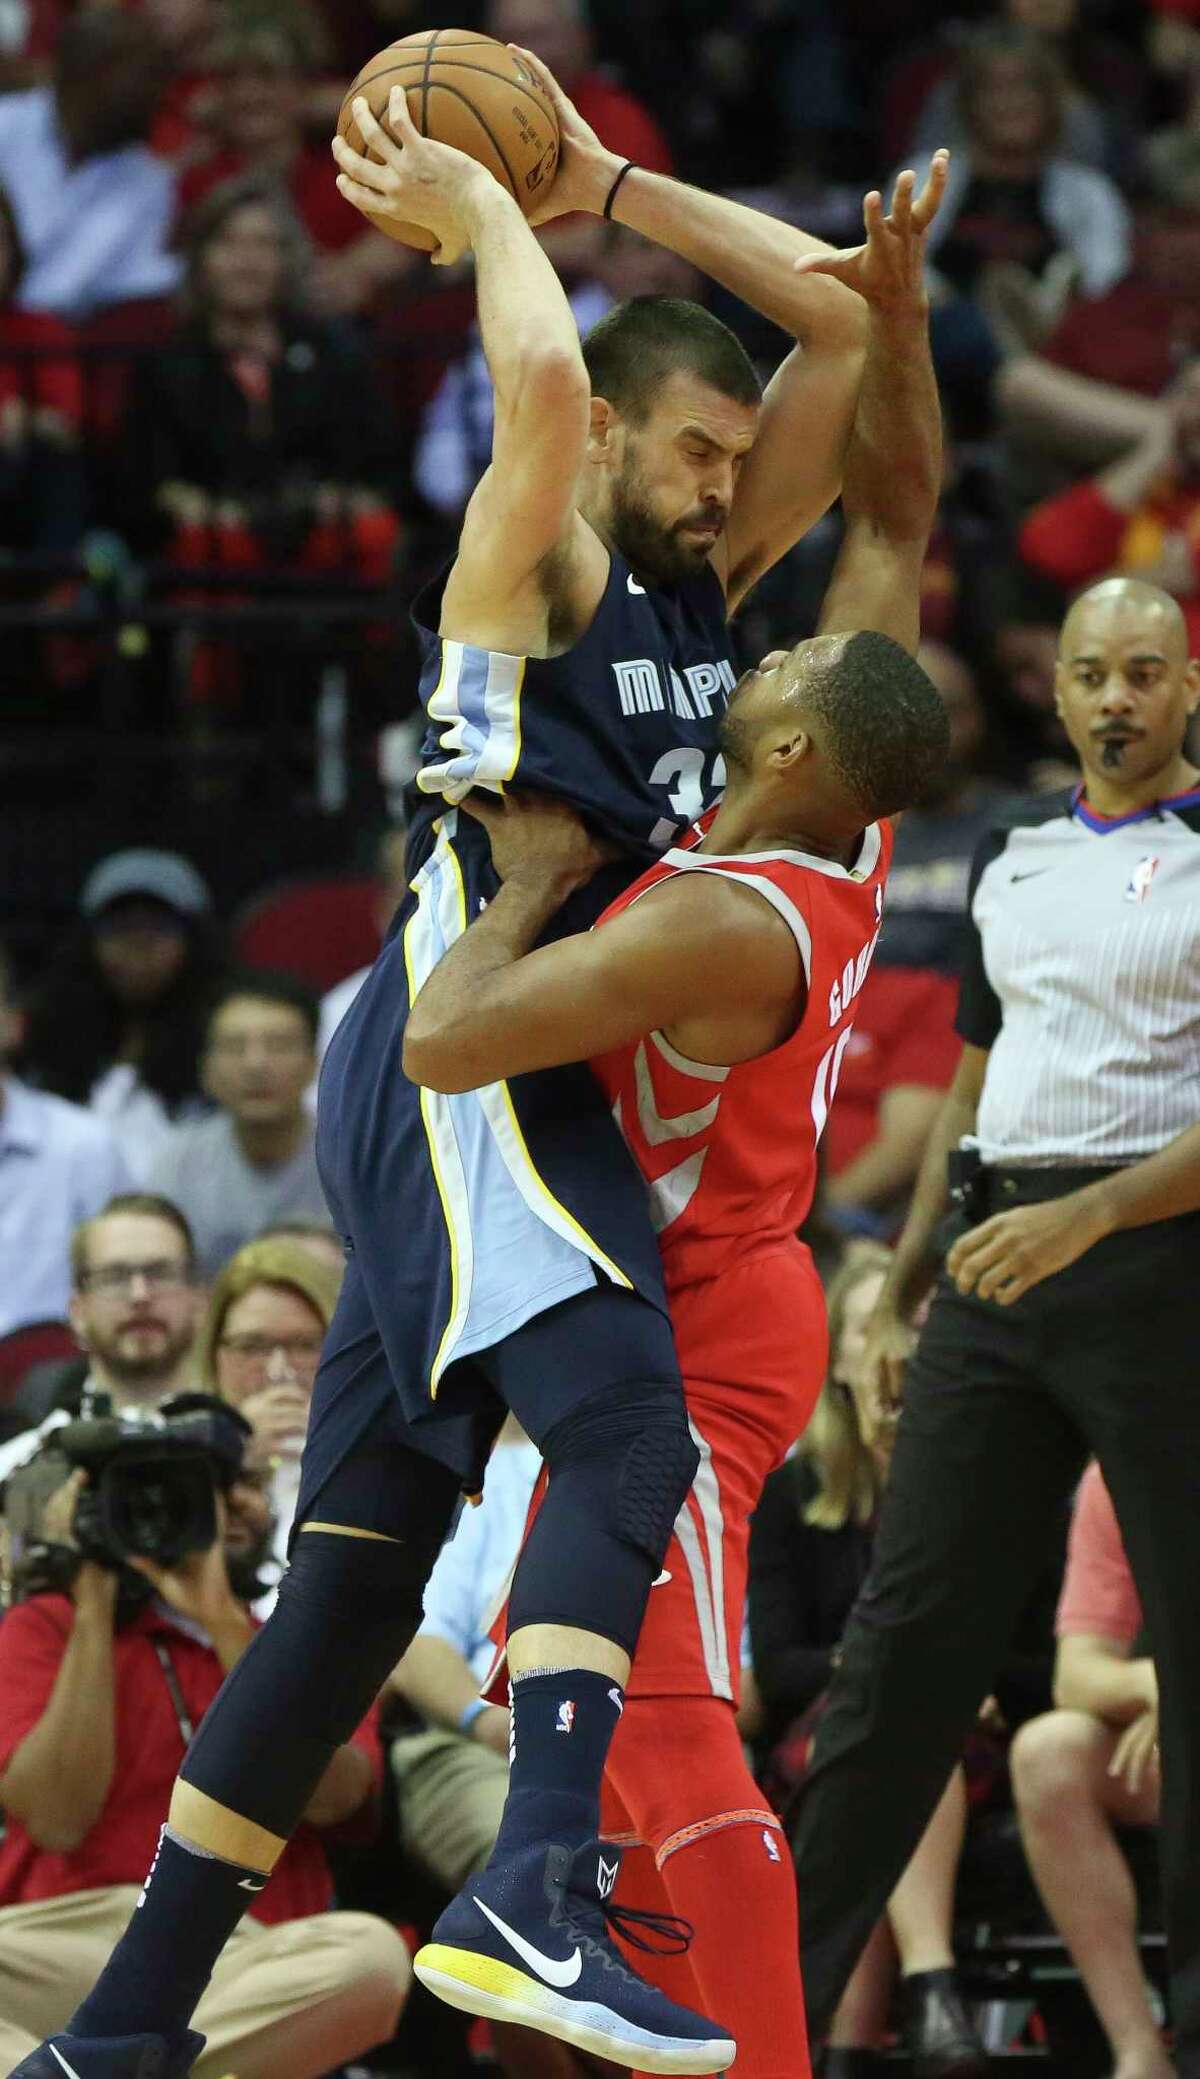 Memphis Grizzlies center Marc Gasol (33) cannot move toward the basket while being defensed by Houston Rockets guard Eric Gordon (10) during the second quarter of the NBA game at Toyota Center Monday, Oct. 23, 2017, in Houston.